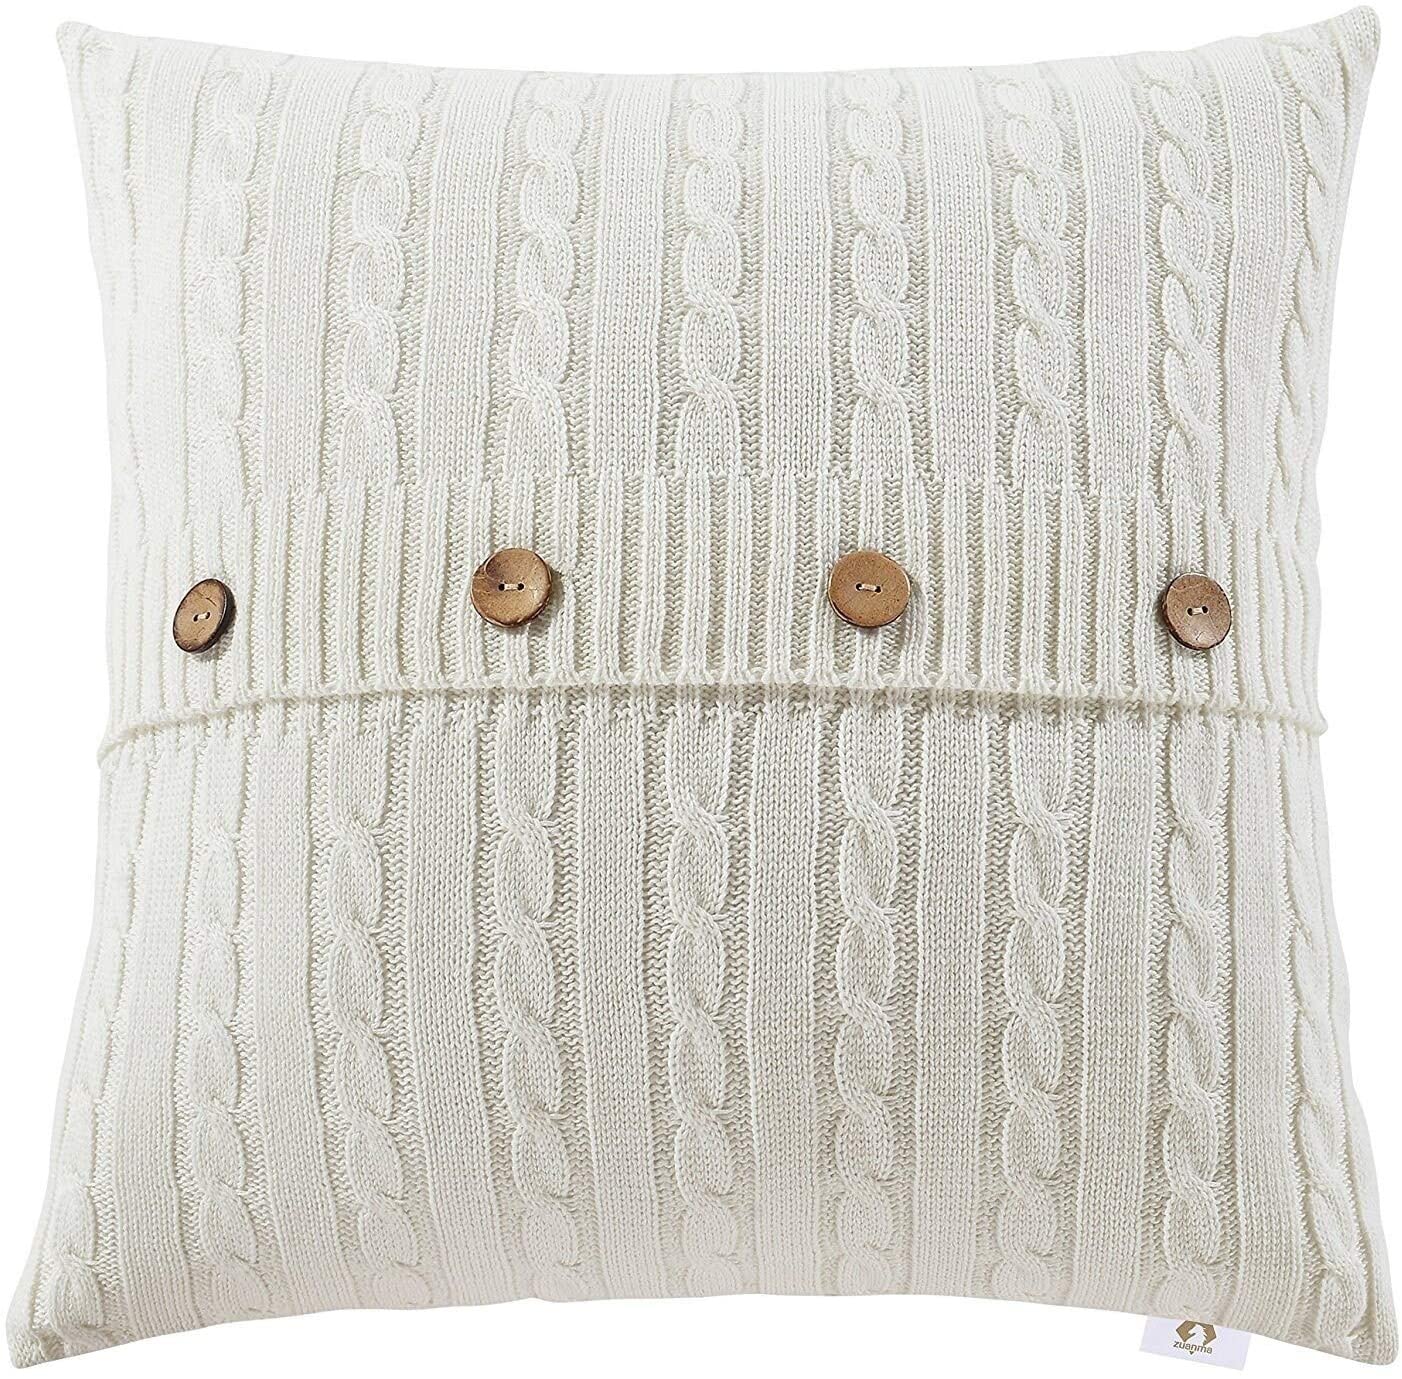 Cable Cotton Knit Throw Pillow Case Color Graphic Casual Acrylic Removable Cover